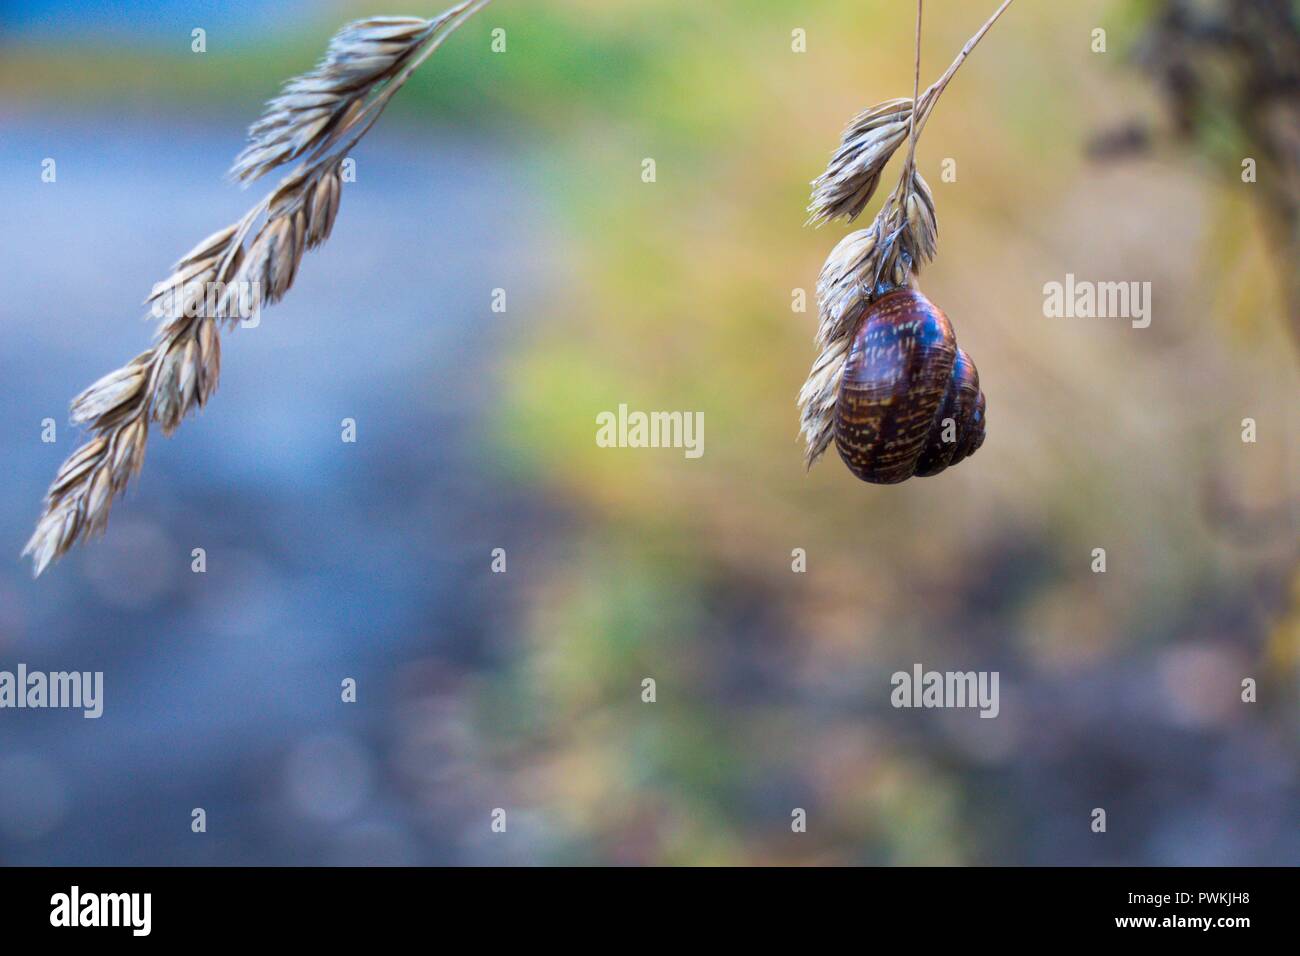 On the ear of a dry field plant sits a snail. Autumn time gives colorful hues to the background, such as blue, yellow and green. Stock Photo